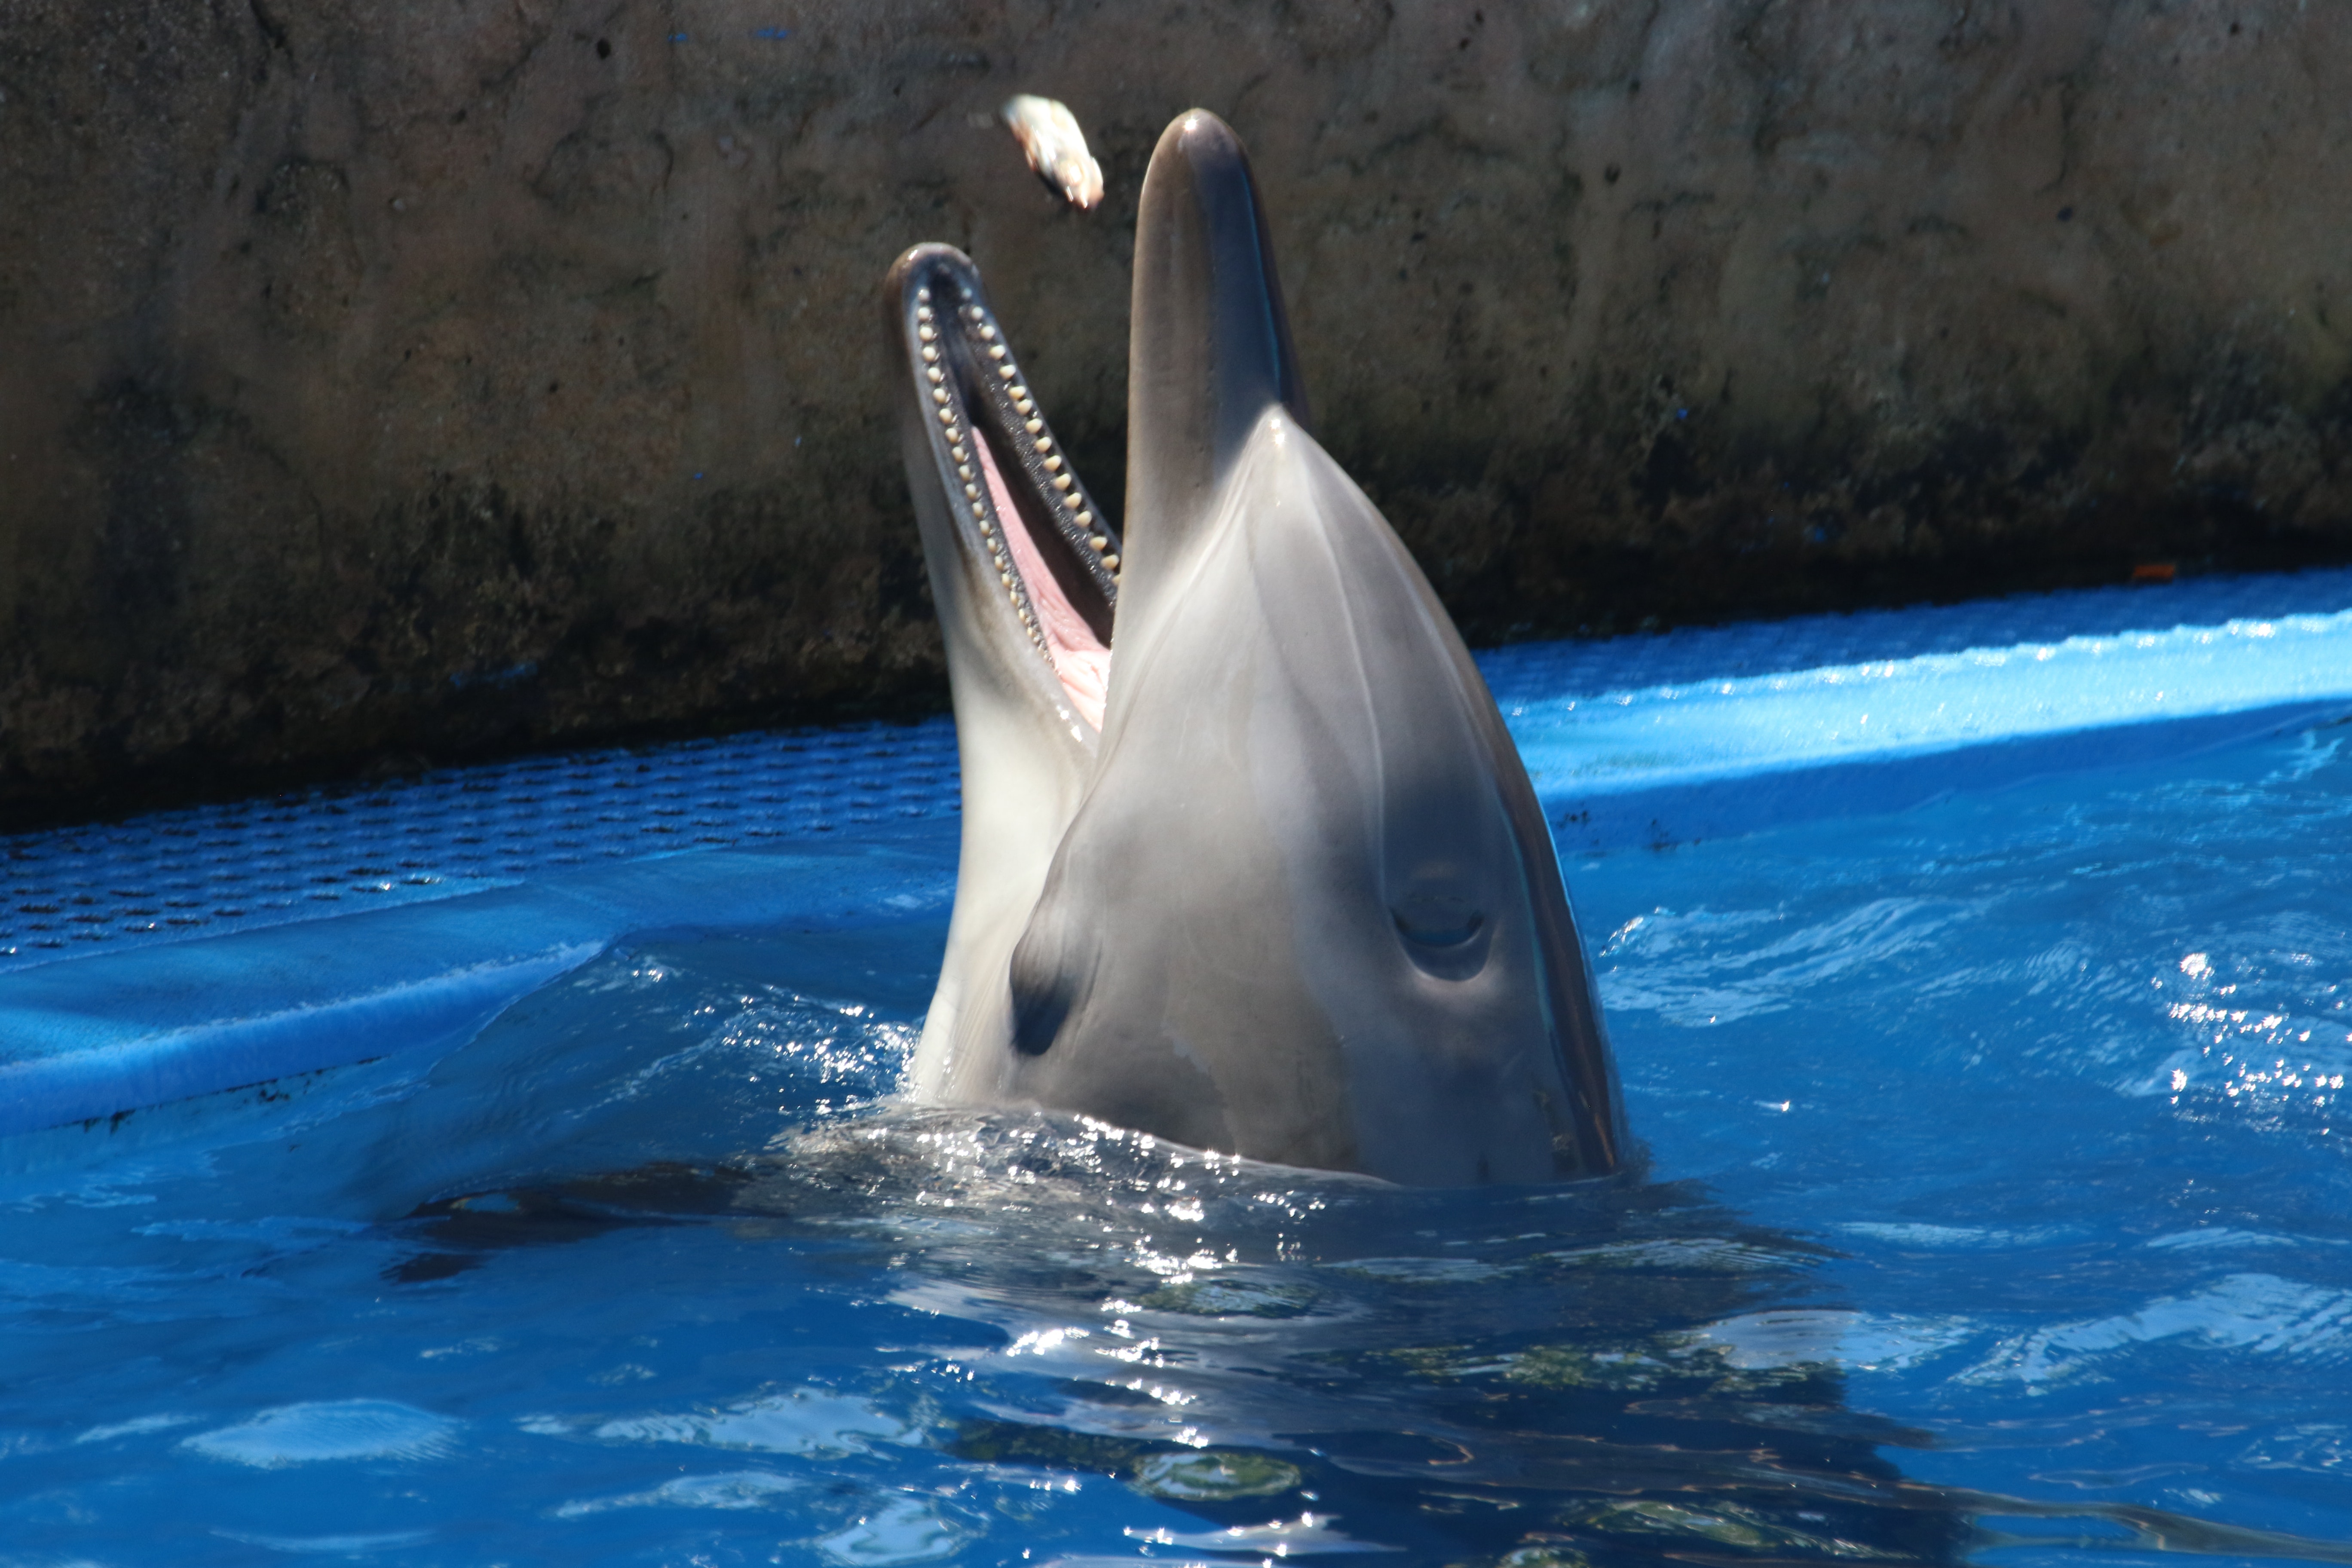 Gray Dolphin on Blue Water, Holiday, Wet, Water, Underwater, HQ Photo